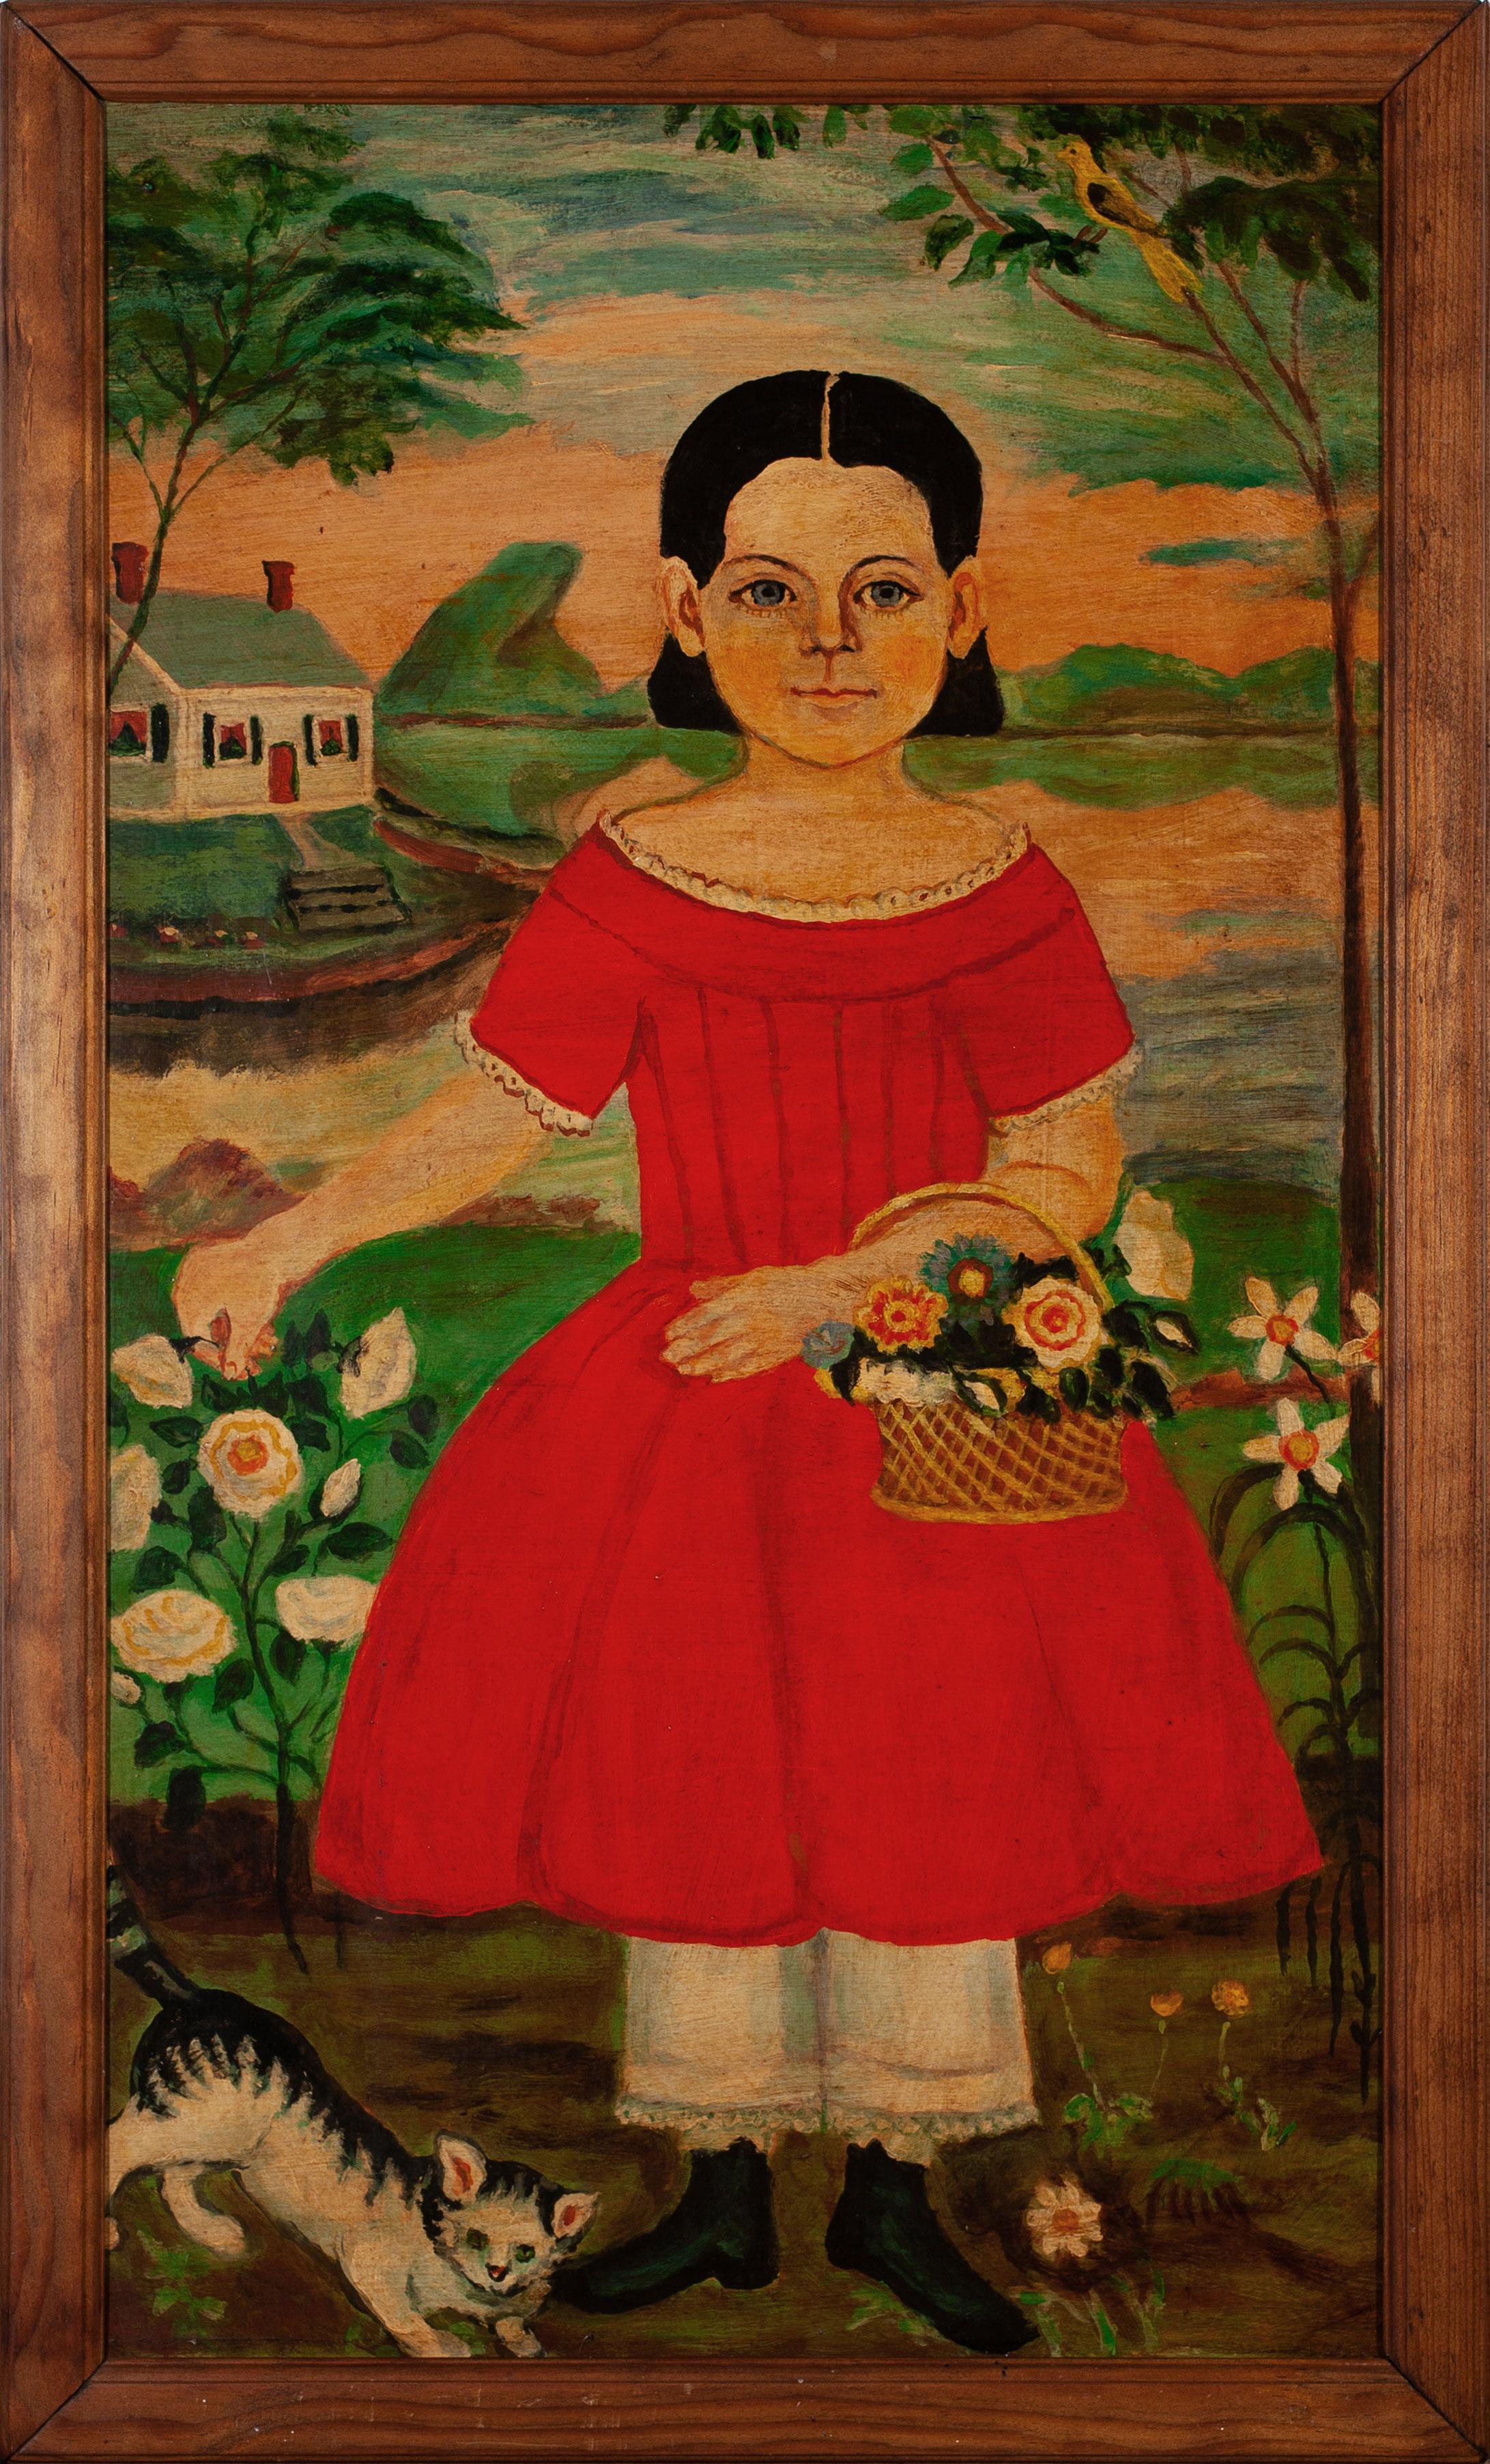 Unknown Figurative Painting - Child with Kitten and Basket of Flowers